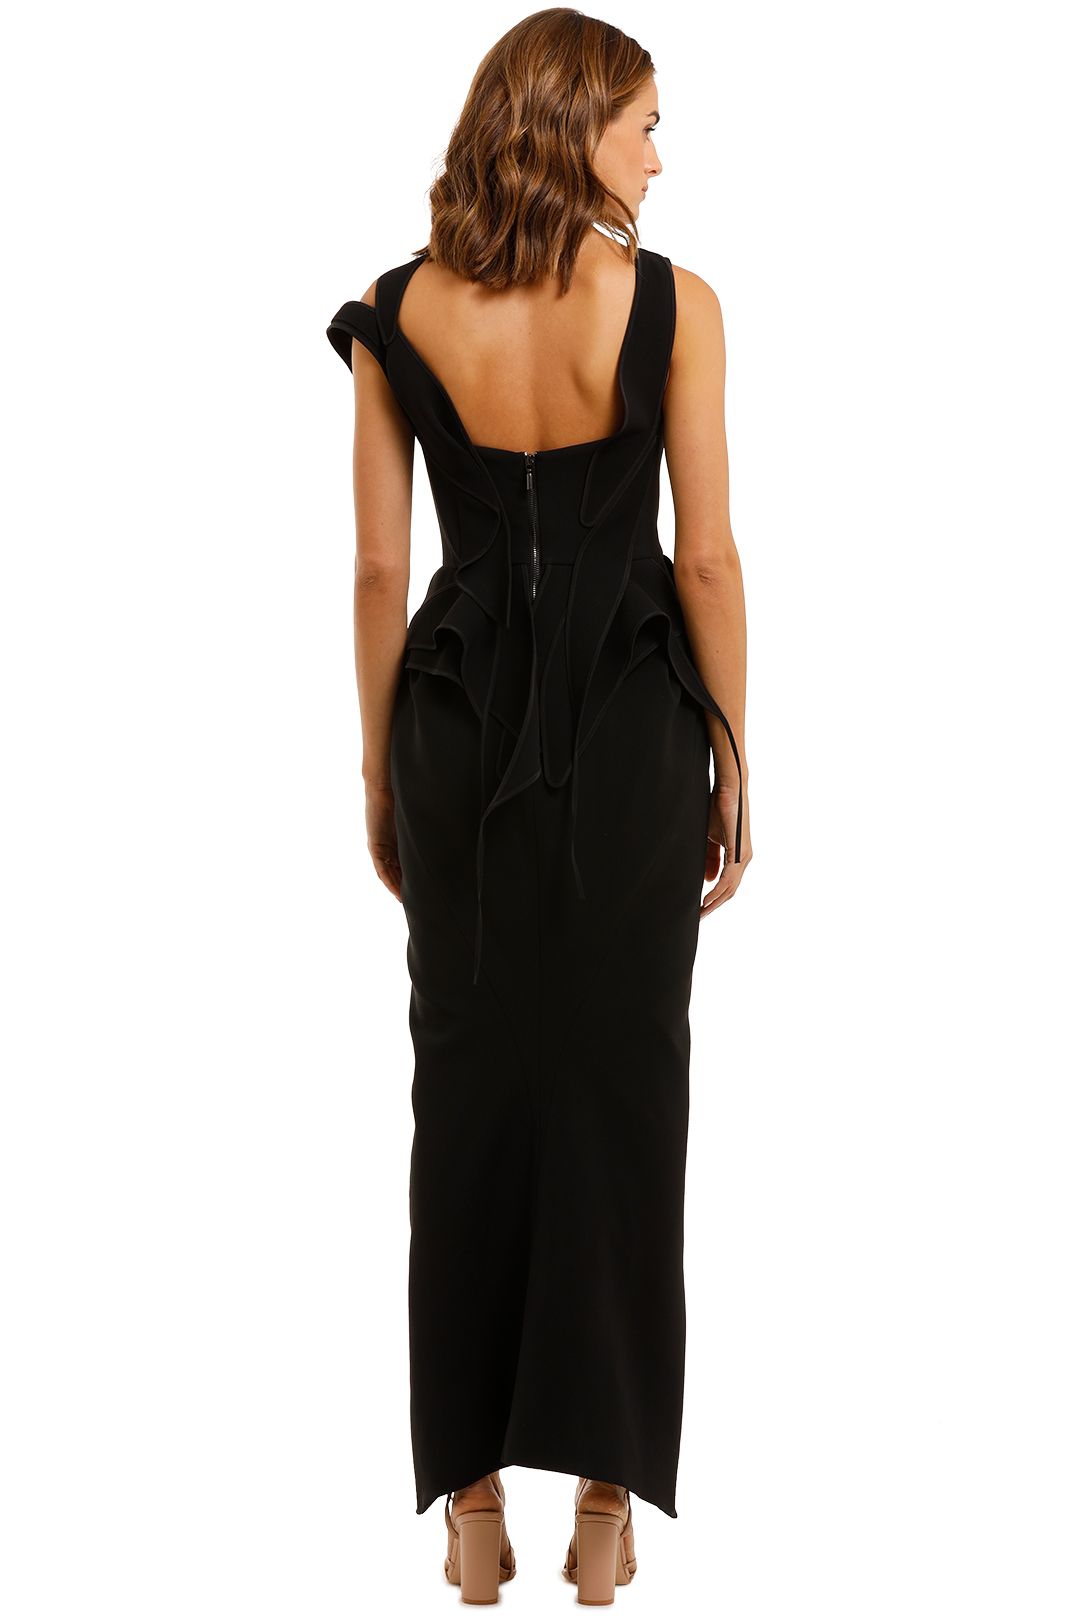 Maticevski Abide Gown draped high low